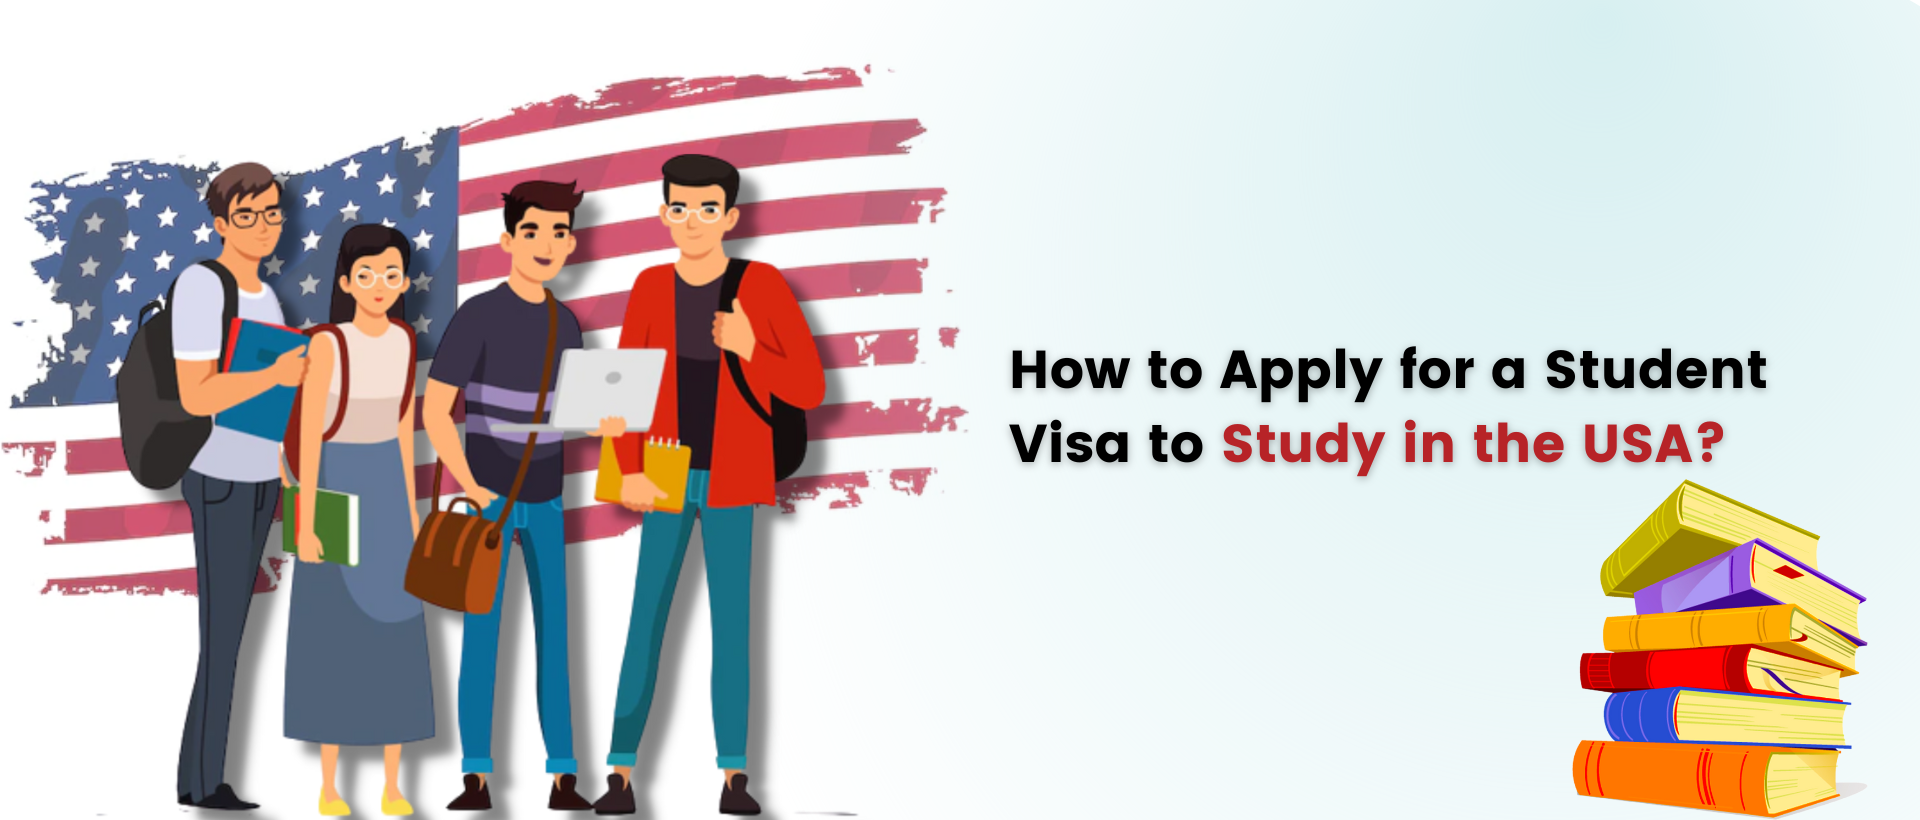 How to apply for a student visa to study in the usa